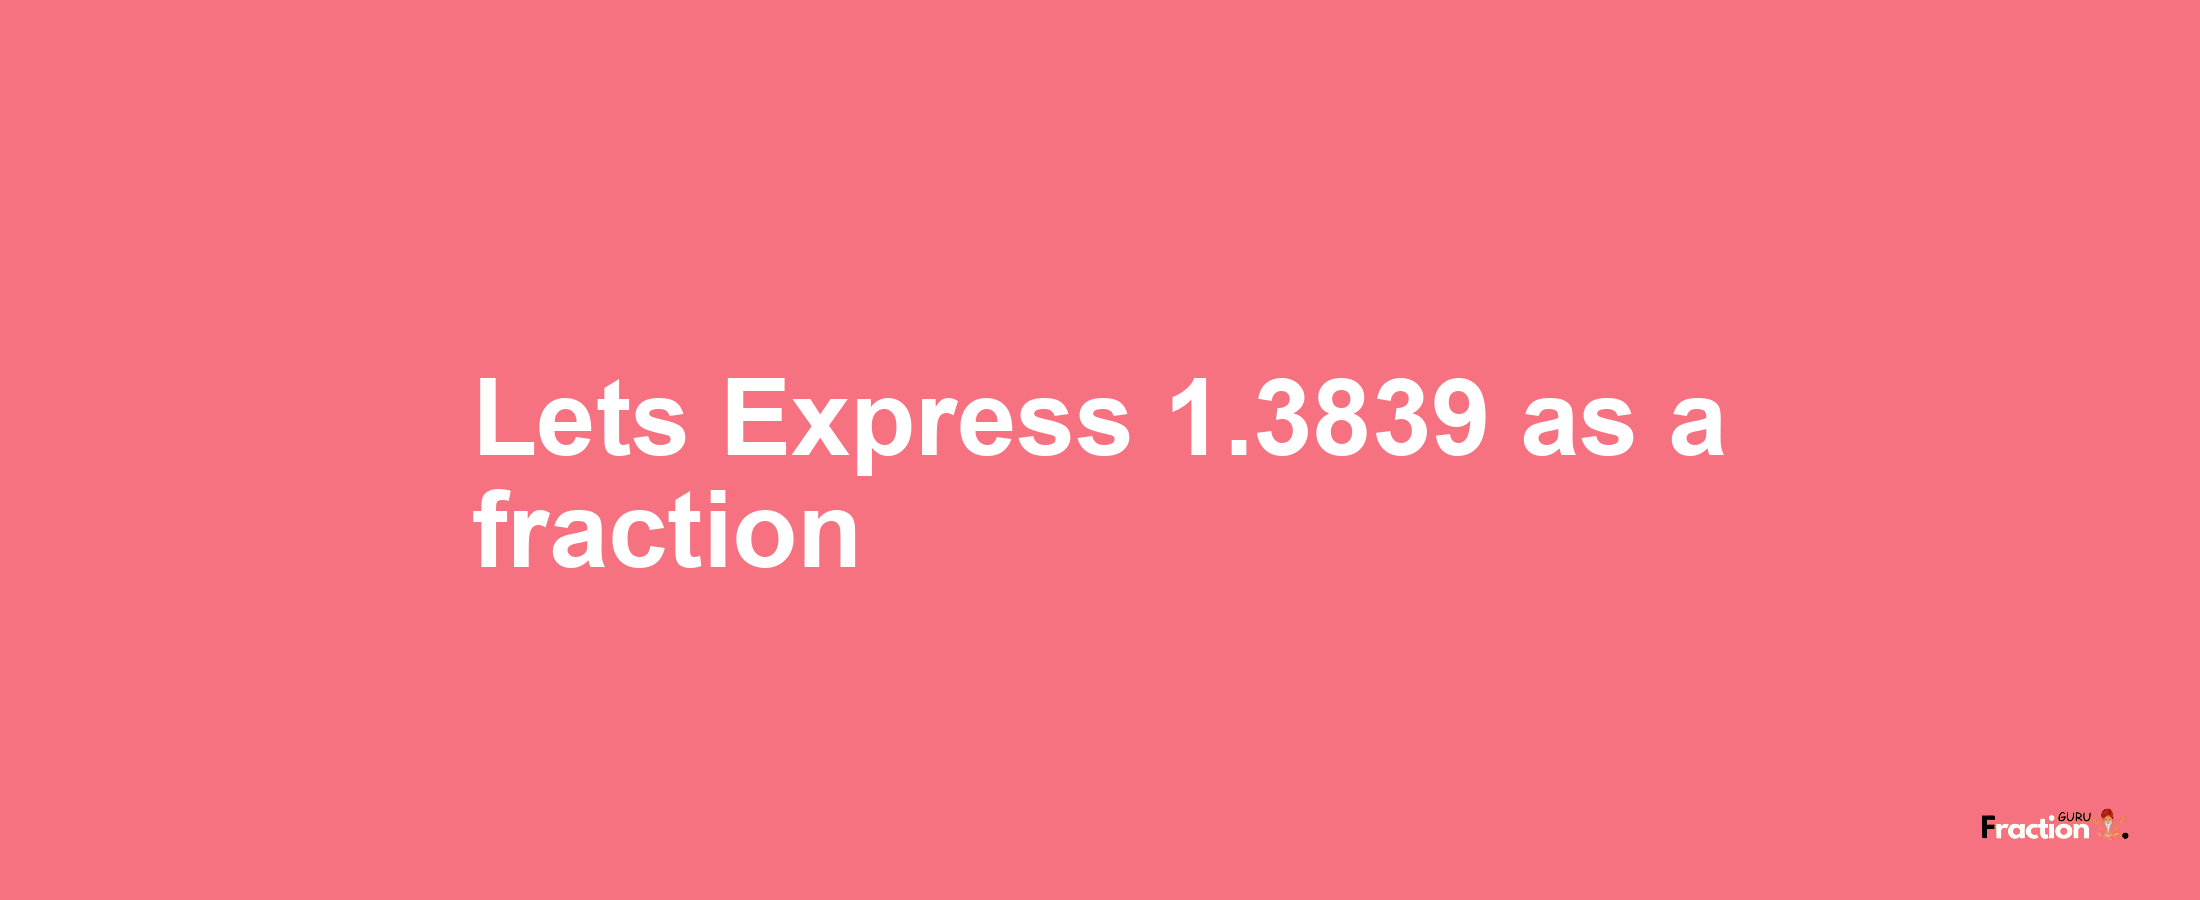 Lets Express 1.3839 as afraction